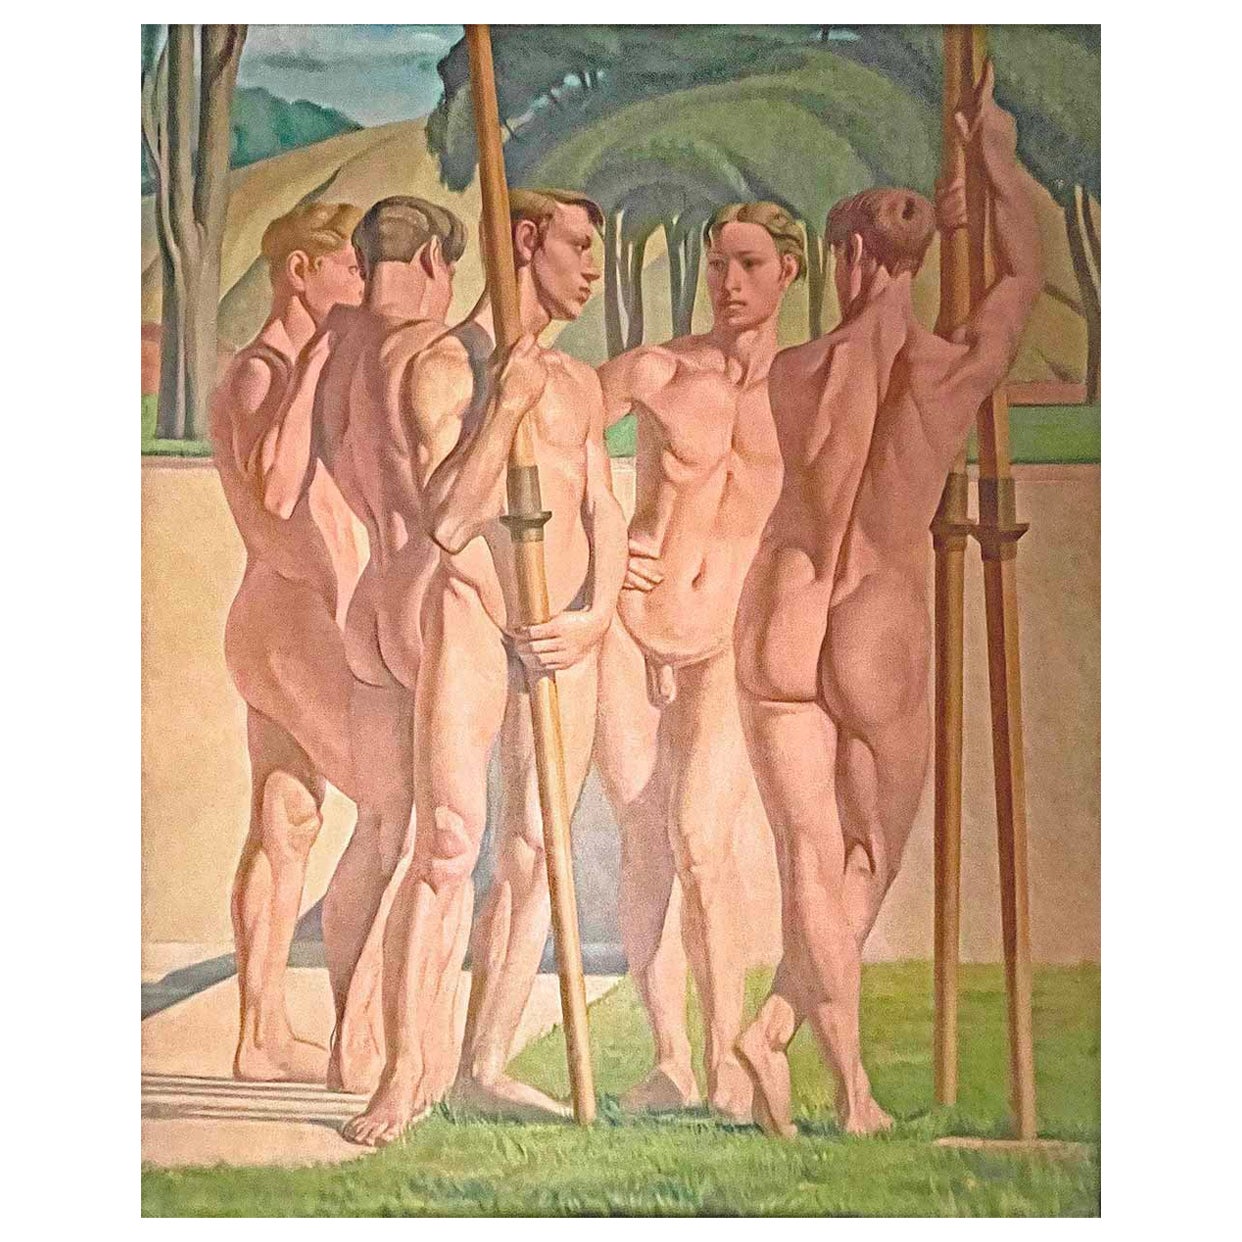 "Five Olympic Rowers," Monumental 1930s Painting of Nude Male Athletes with Oars